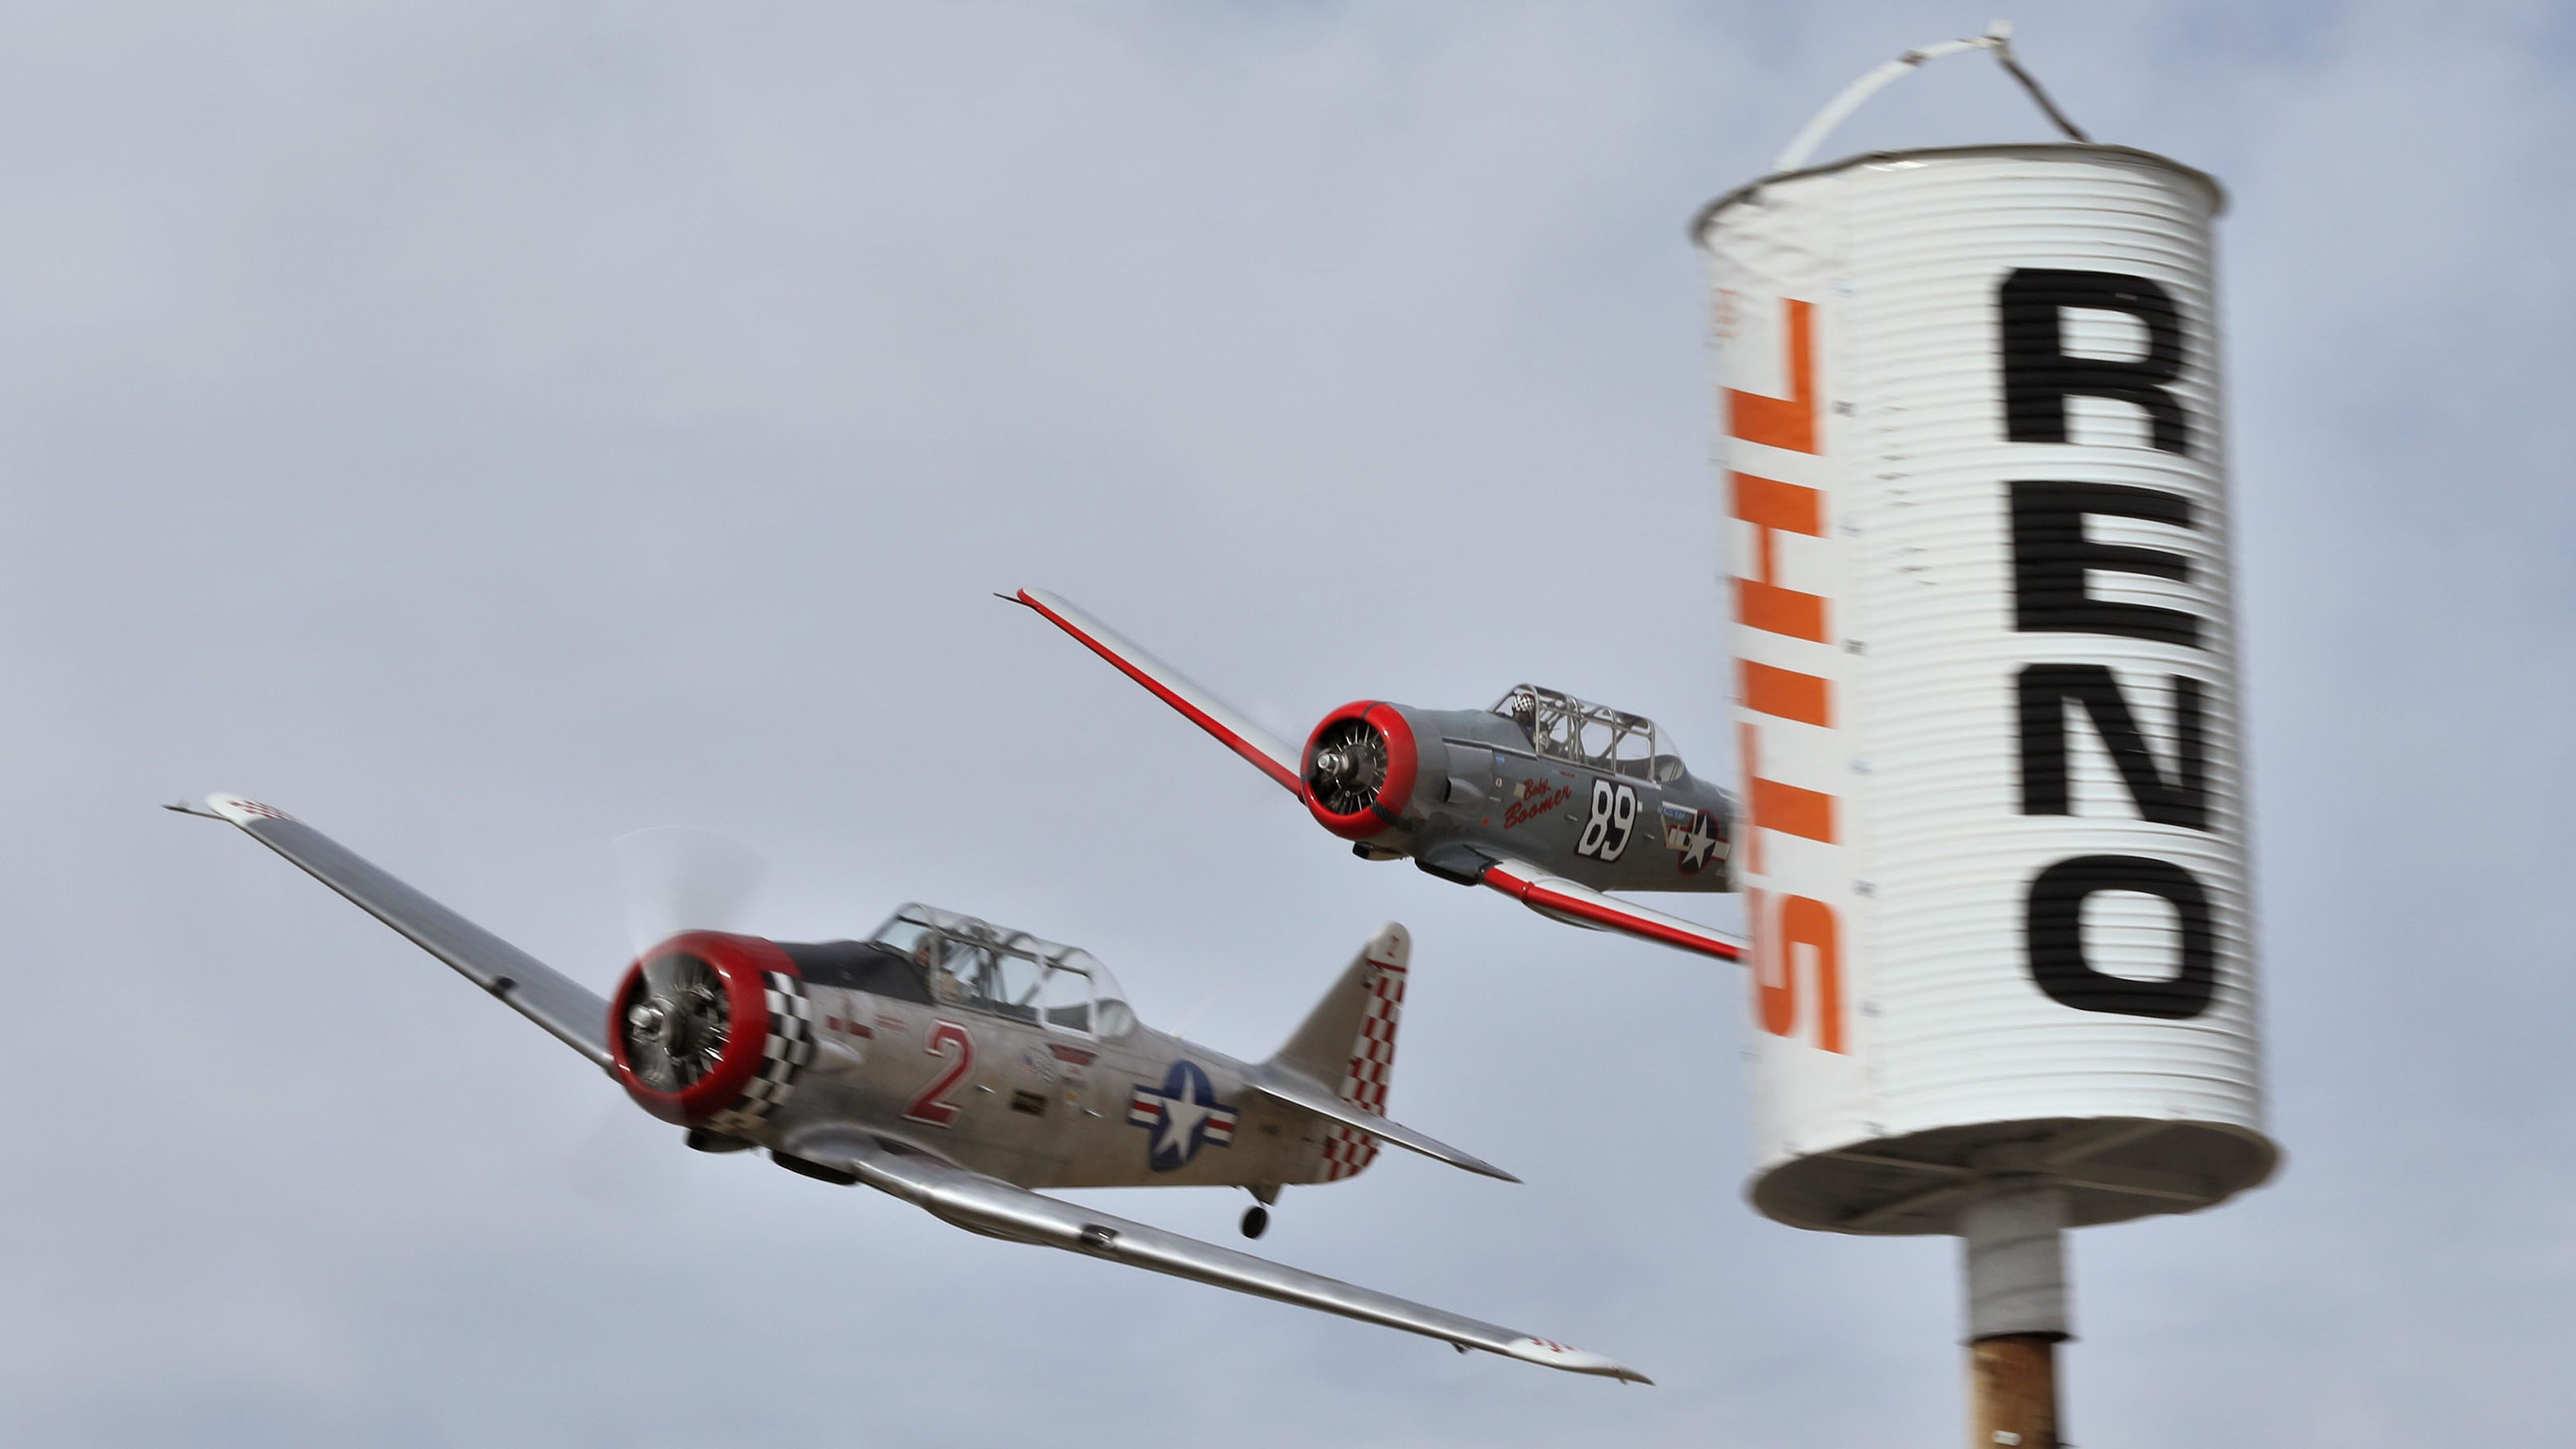 Harvard MK IV "Bare Essentials," flown by Michael Pfleger, left, battles with Gene McNeely's AT-6, "Baby Boomer," going around a pylon at the 2019 Stihl National Championship Air Races. Photo by Robert Fisher.